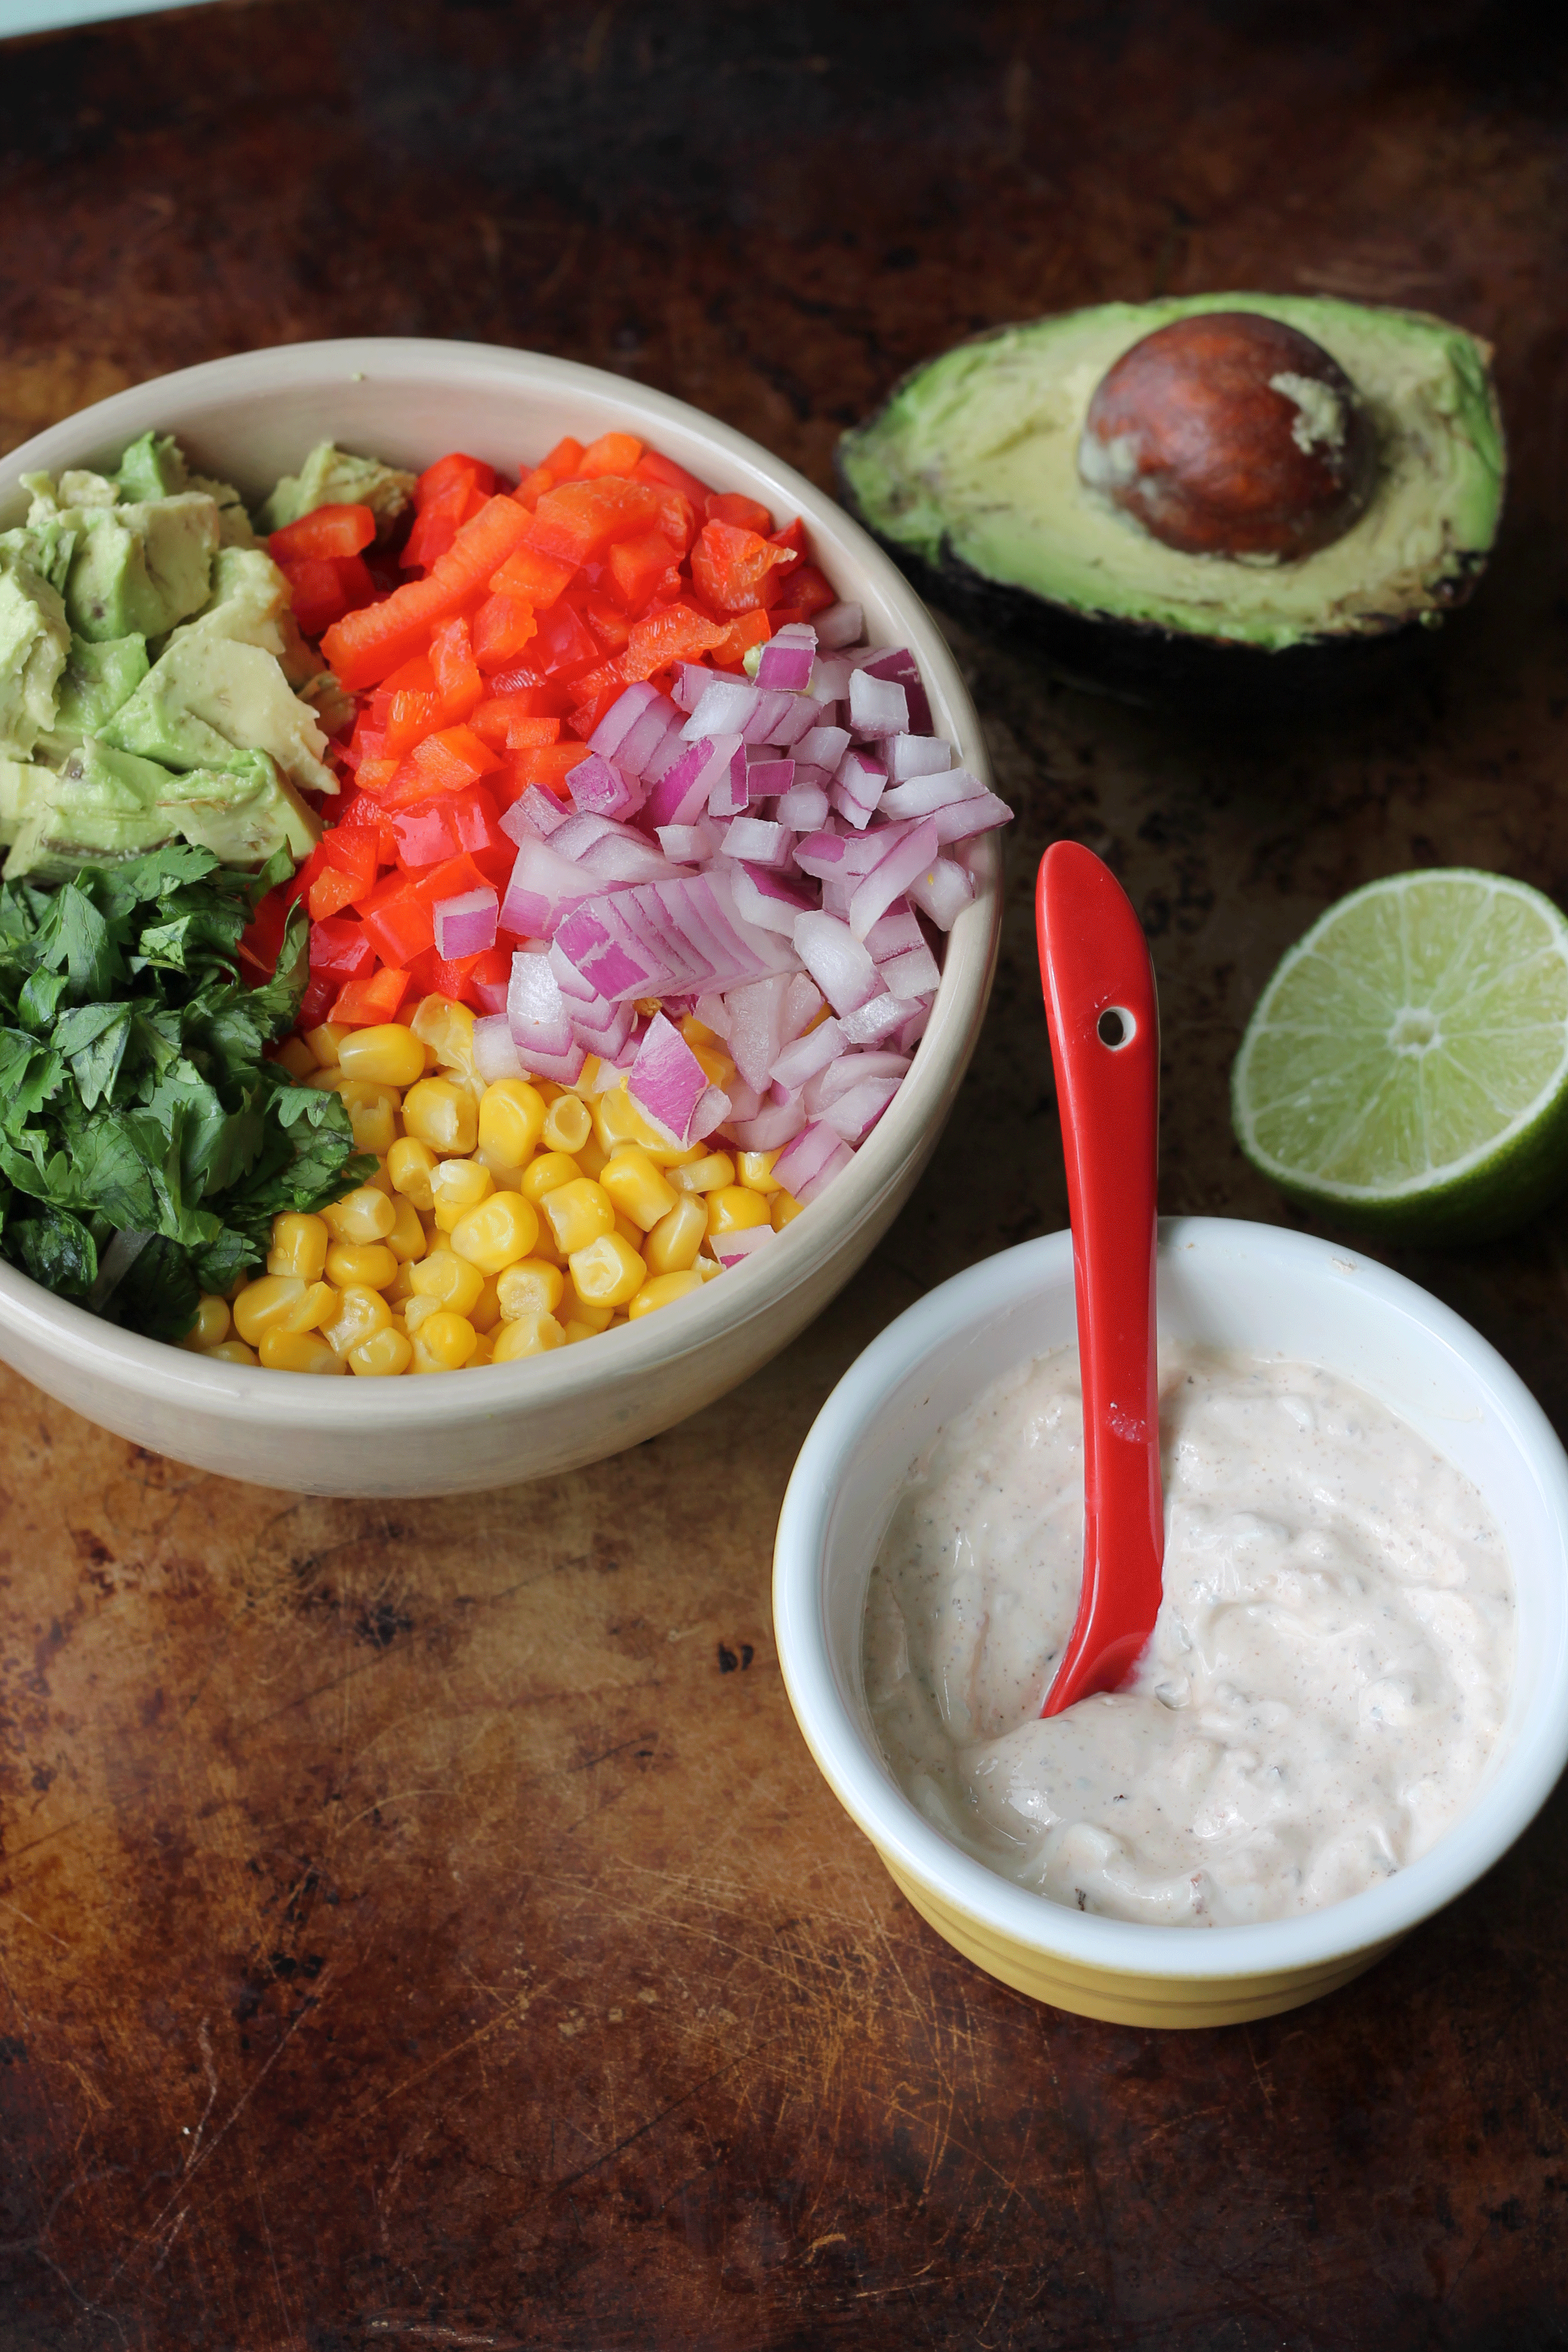 Toppings for tacos - Avocado Corn Salsa and Chipotle Sour Cream